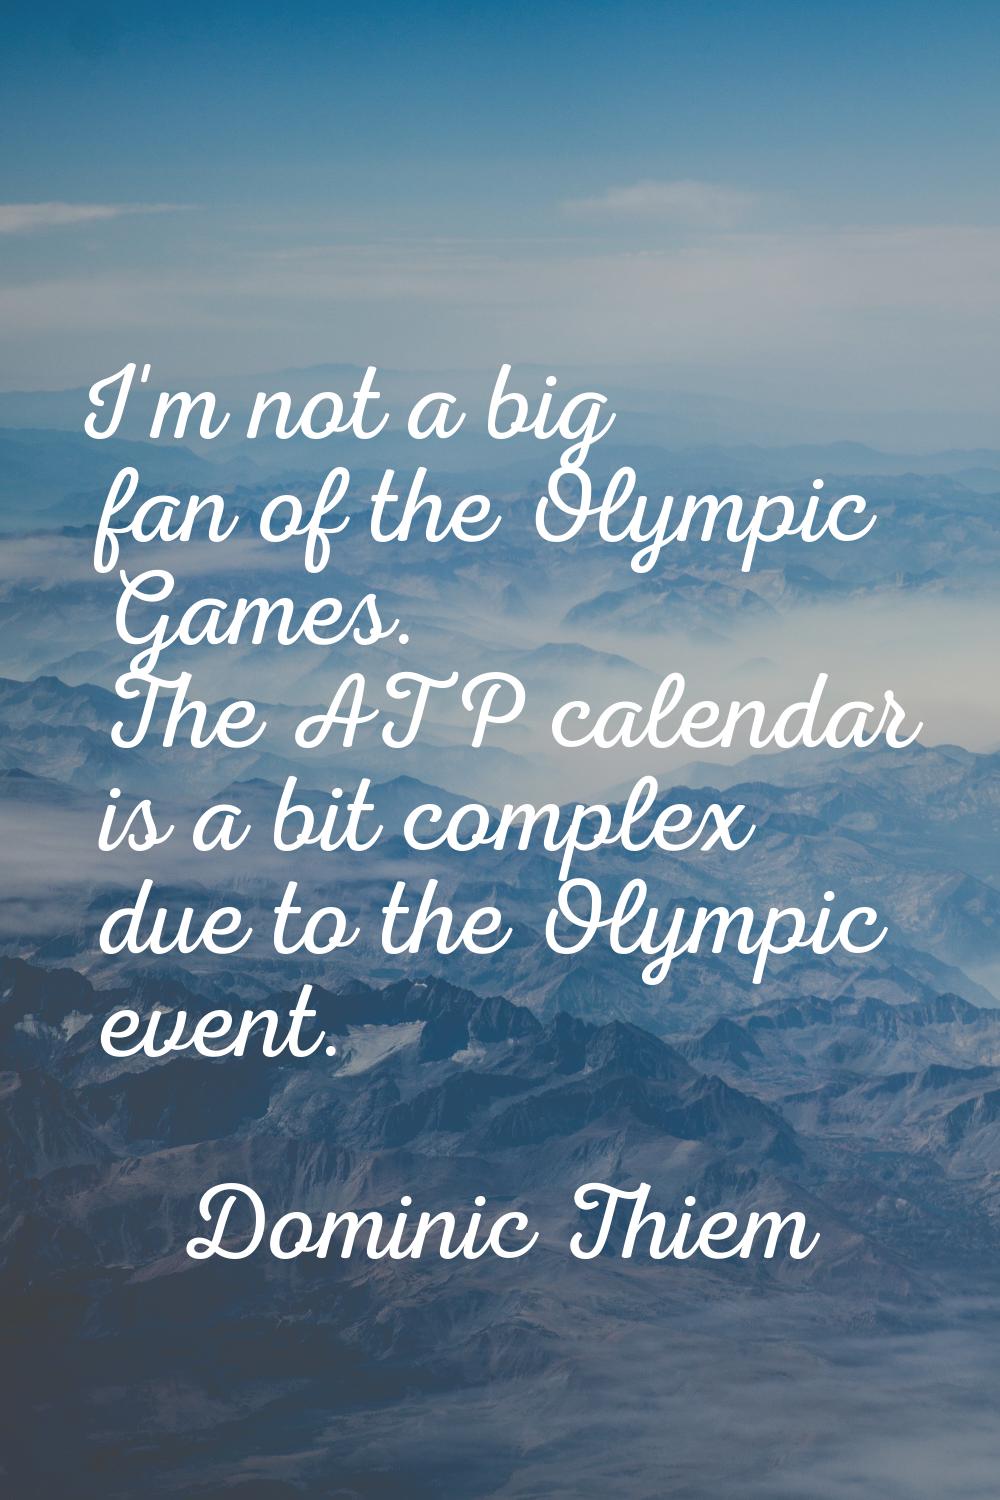 I'm not a big fan of the Olympic Games. The ATP calendar is a bit complex due to the Olympic event.